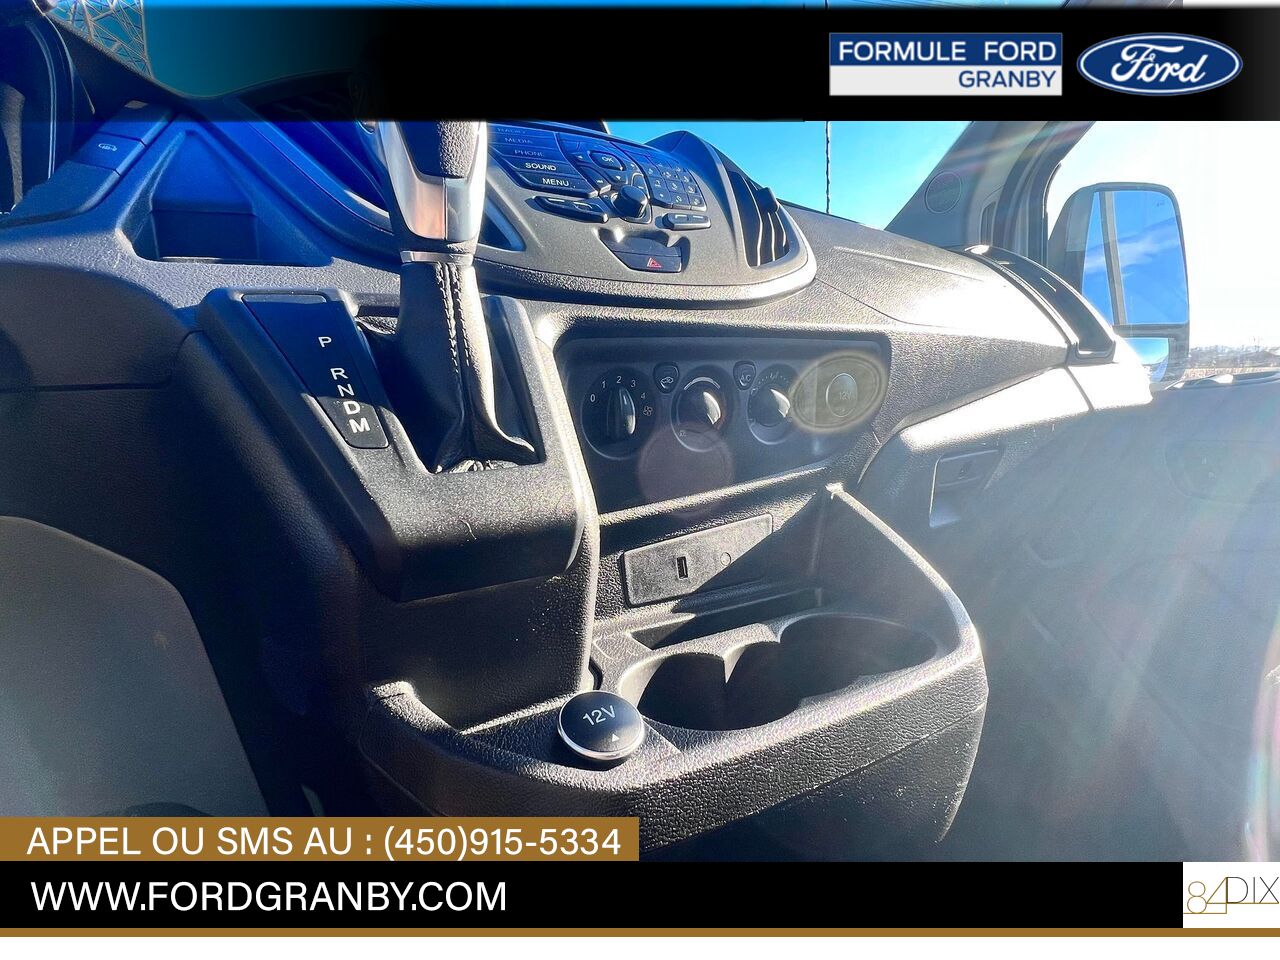 2019 Ford Transit fourgon utilitaire Granby - photo #16